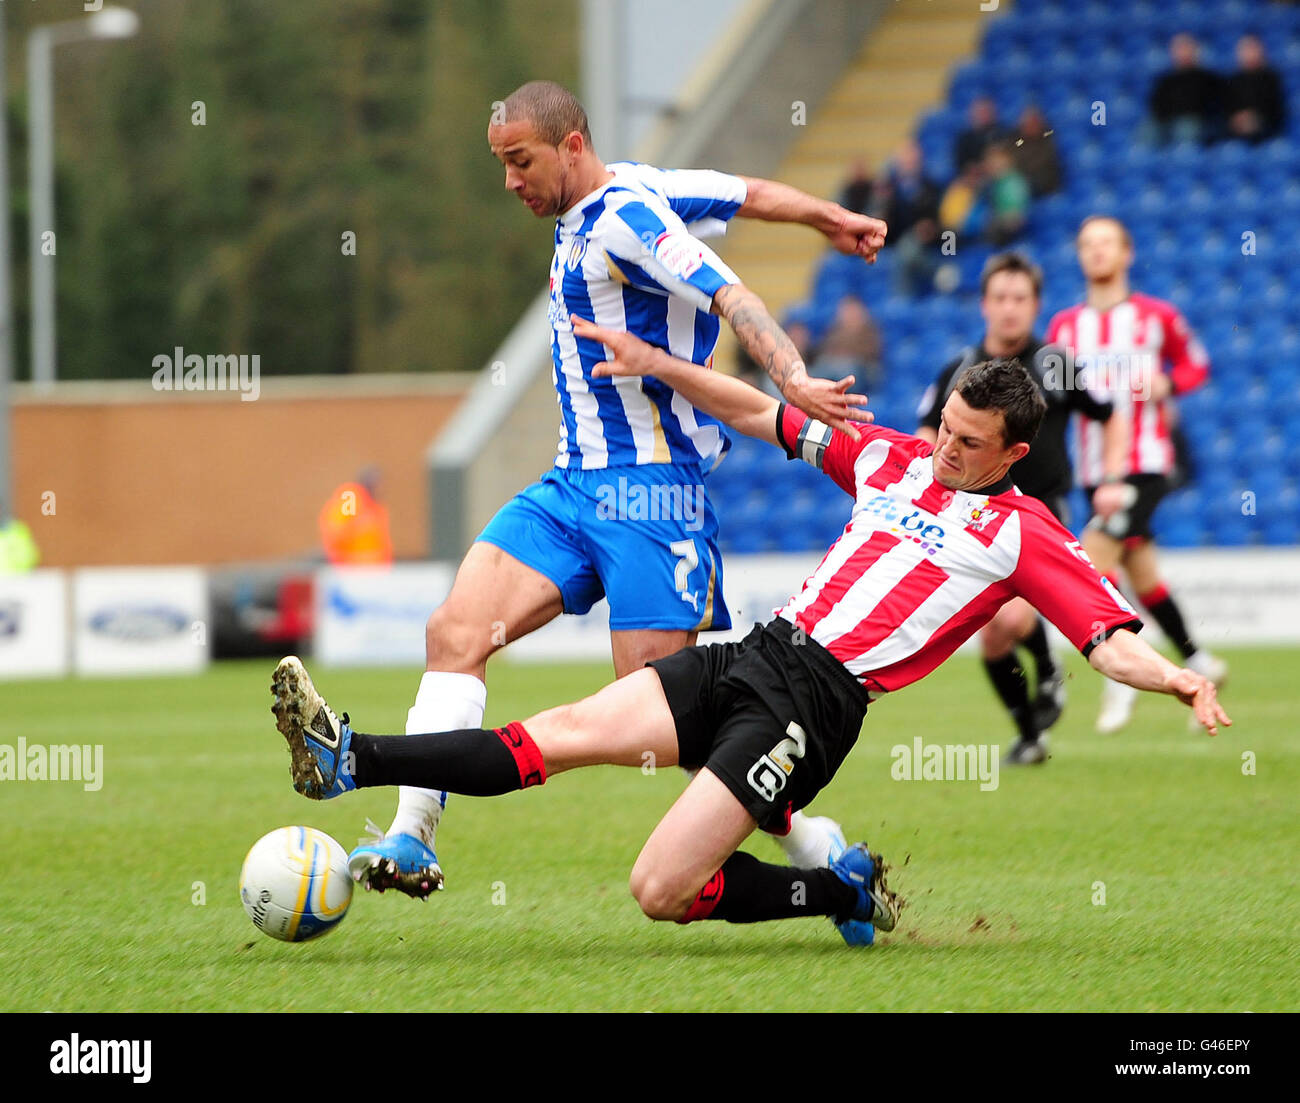 Soccer - npower Football League One - Colchester United v Exeter City - The Weston Homes Community Stadium. Exeter City's Steve Tully fouls Colchester United's Ashley Vincent resulting in him getting a red card Stock Photo